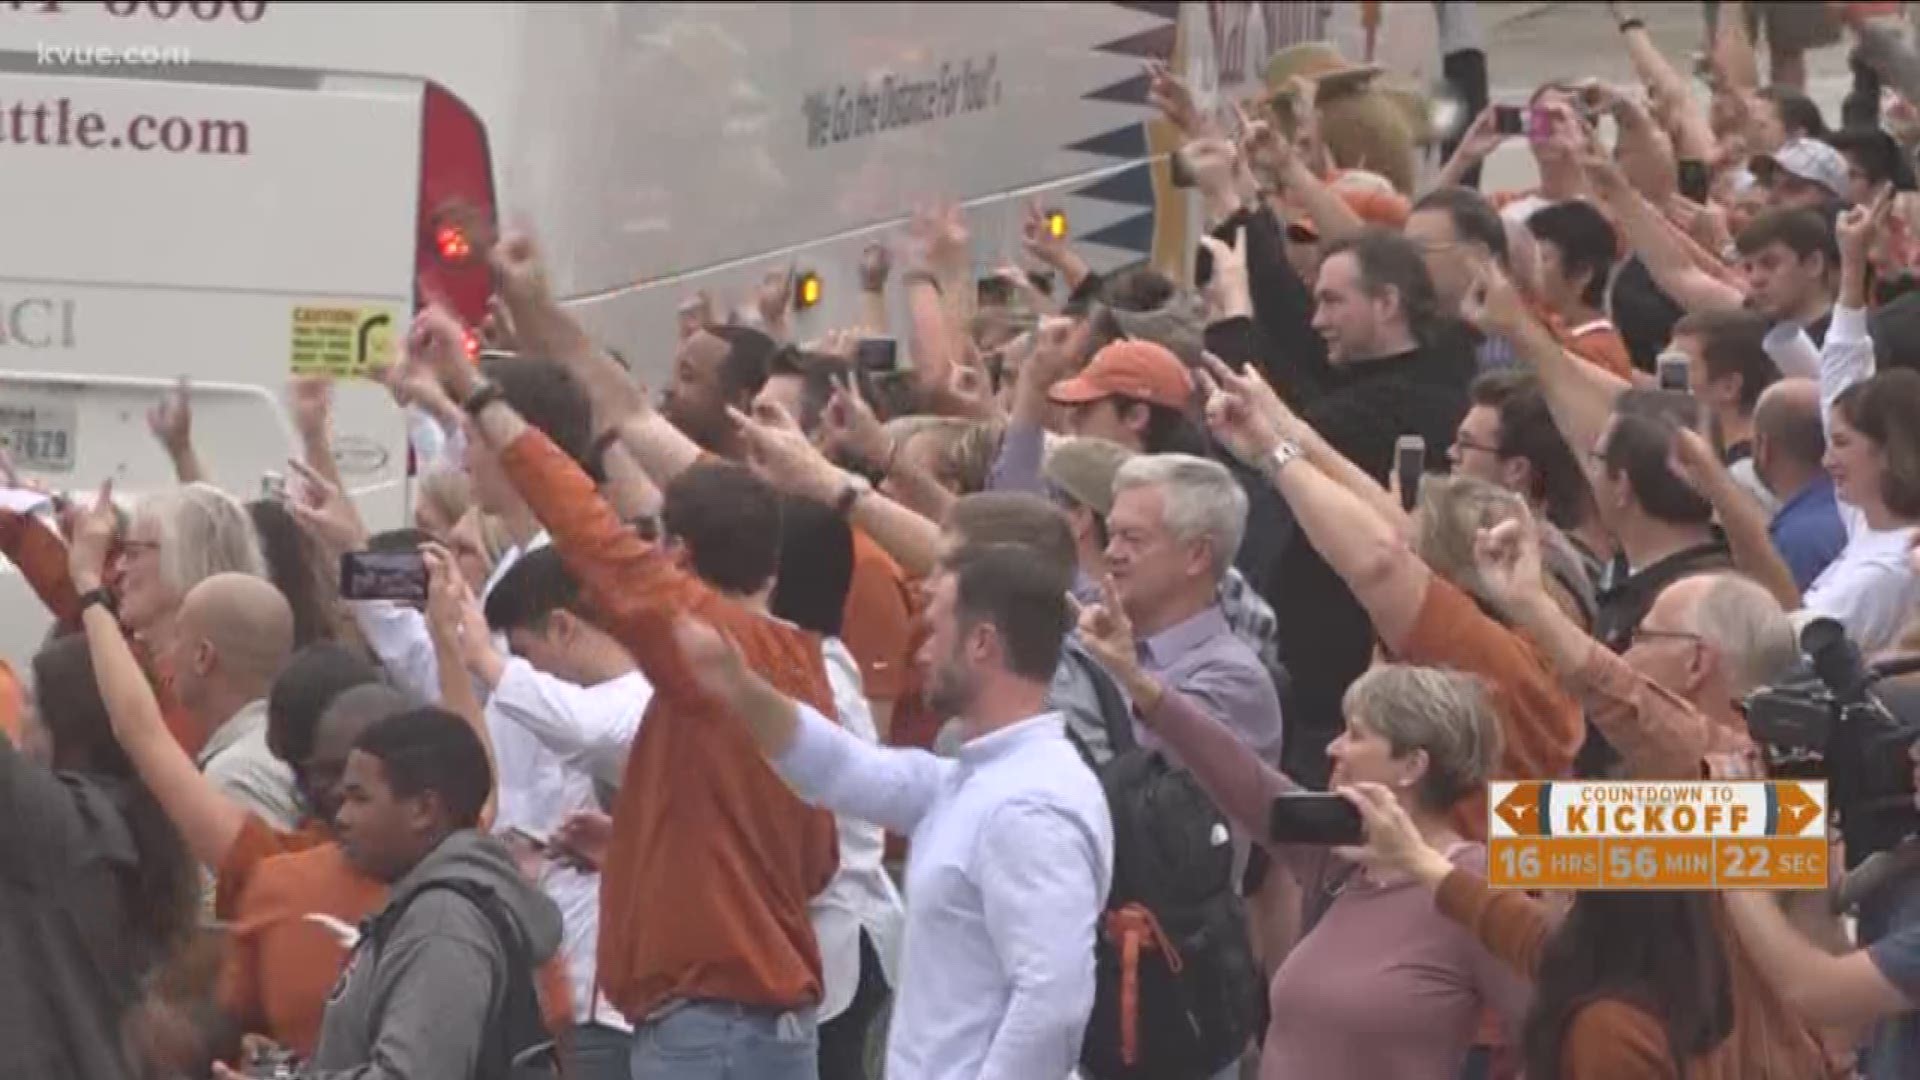 The Texas Longhorns headed out to Arlington,Texas, Friday morning to prepare for the Big 12 Championship game against the Oklahoma Sooners.
STORY: http://www.kvue.com/sports/longhorns-fans-invited-to-texas-sized-send-off-friday-to-big-12-championship-game